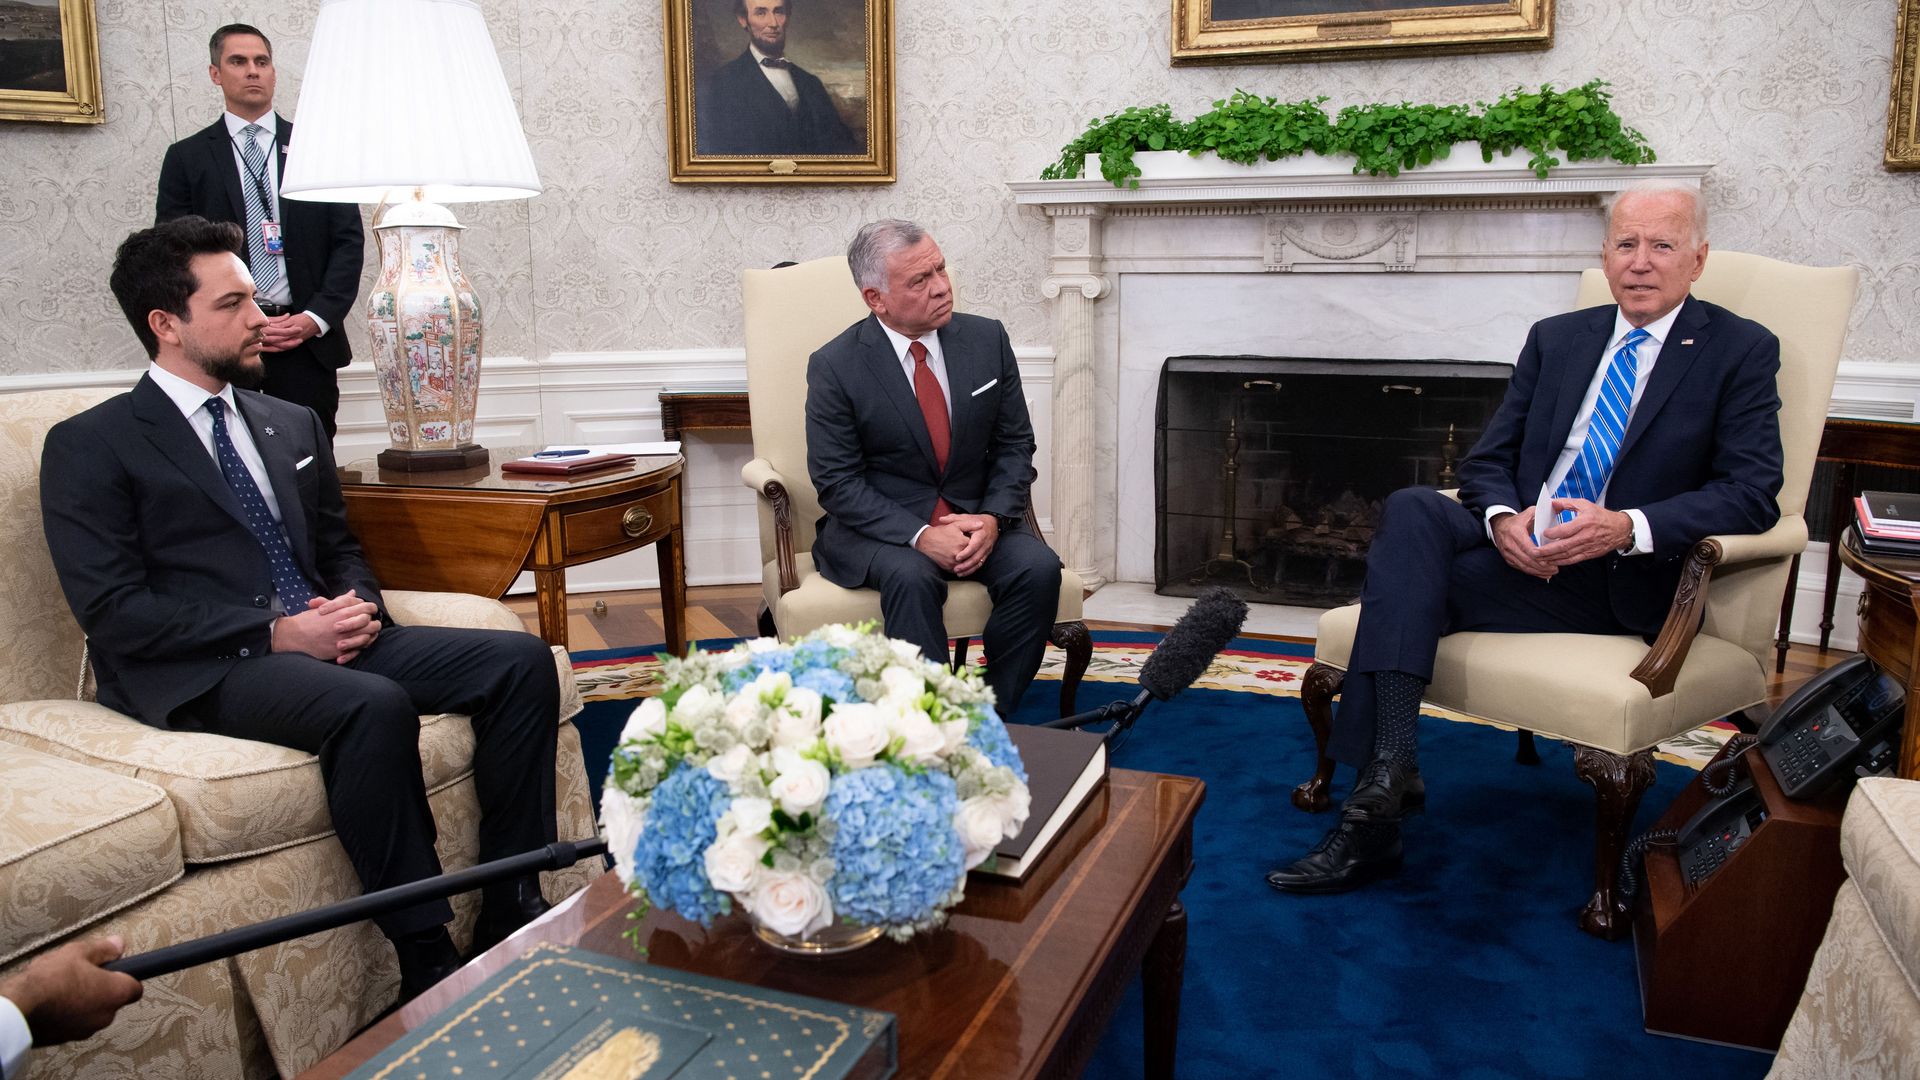 King Hussein of Jordan and his eldest son meet with President Biden in the Oval Office.